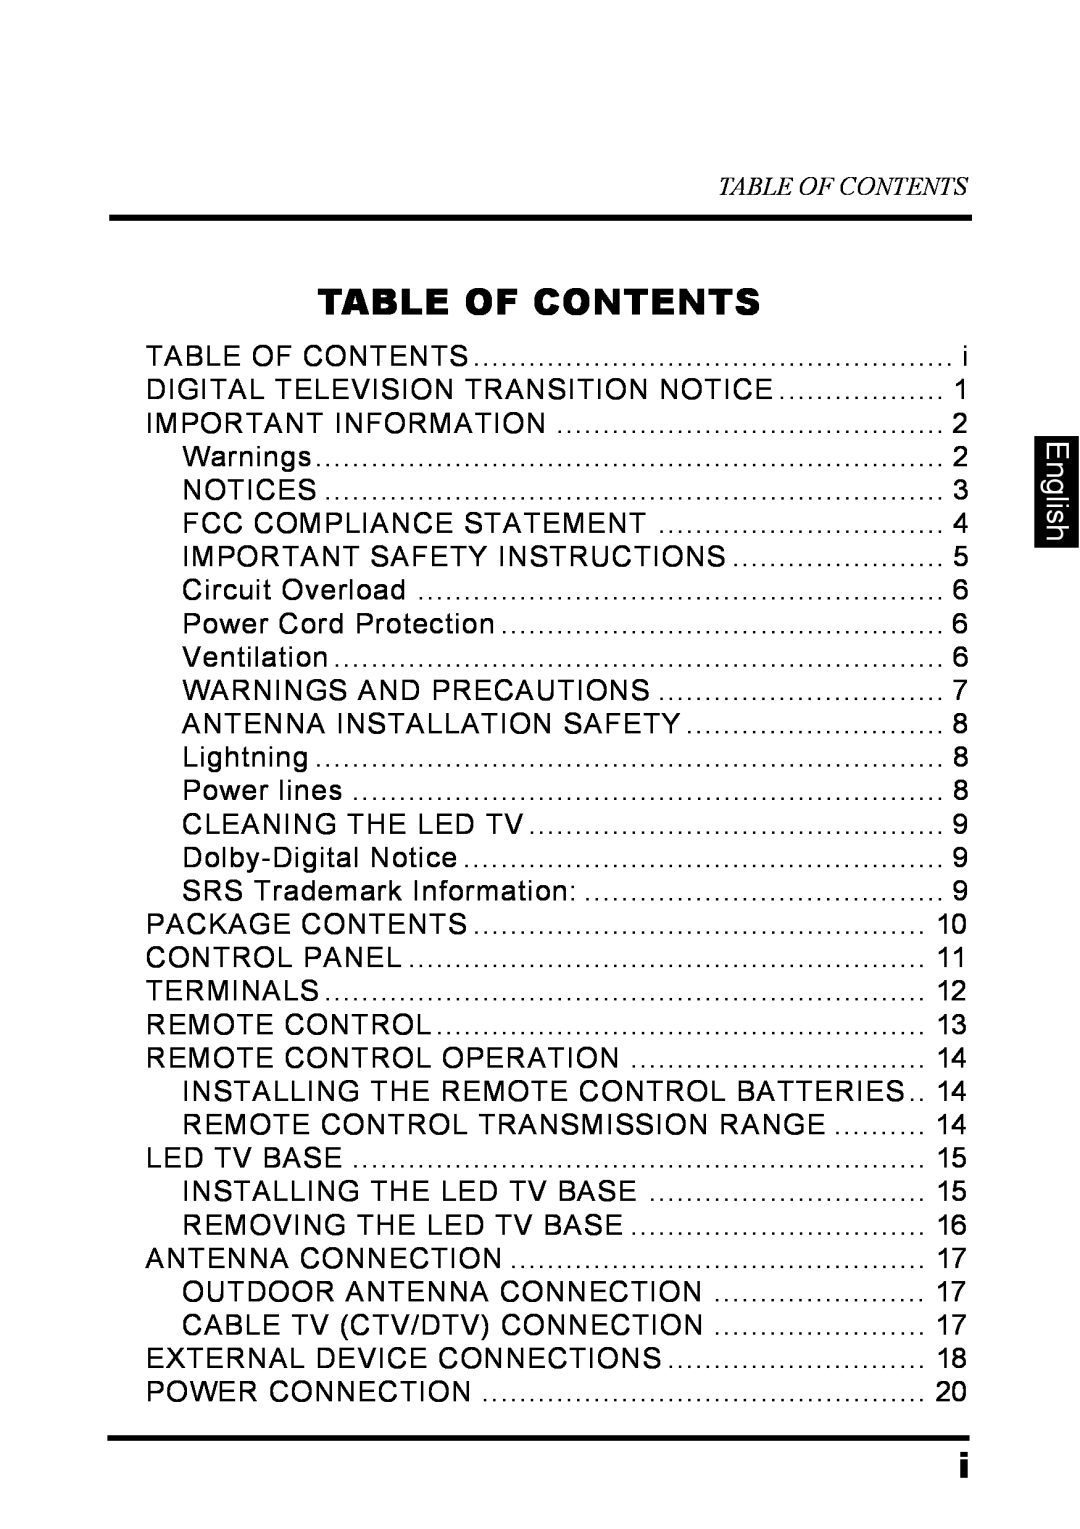 Westinghouse LD-3237 user manual English, Table Of Contents 